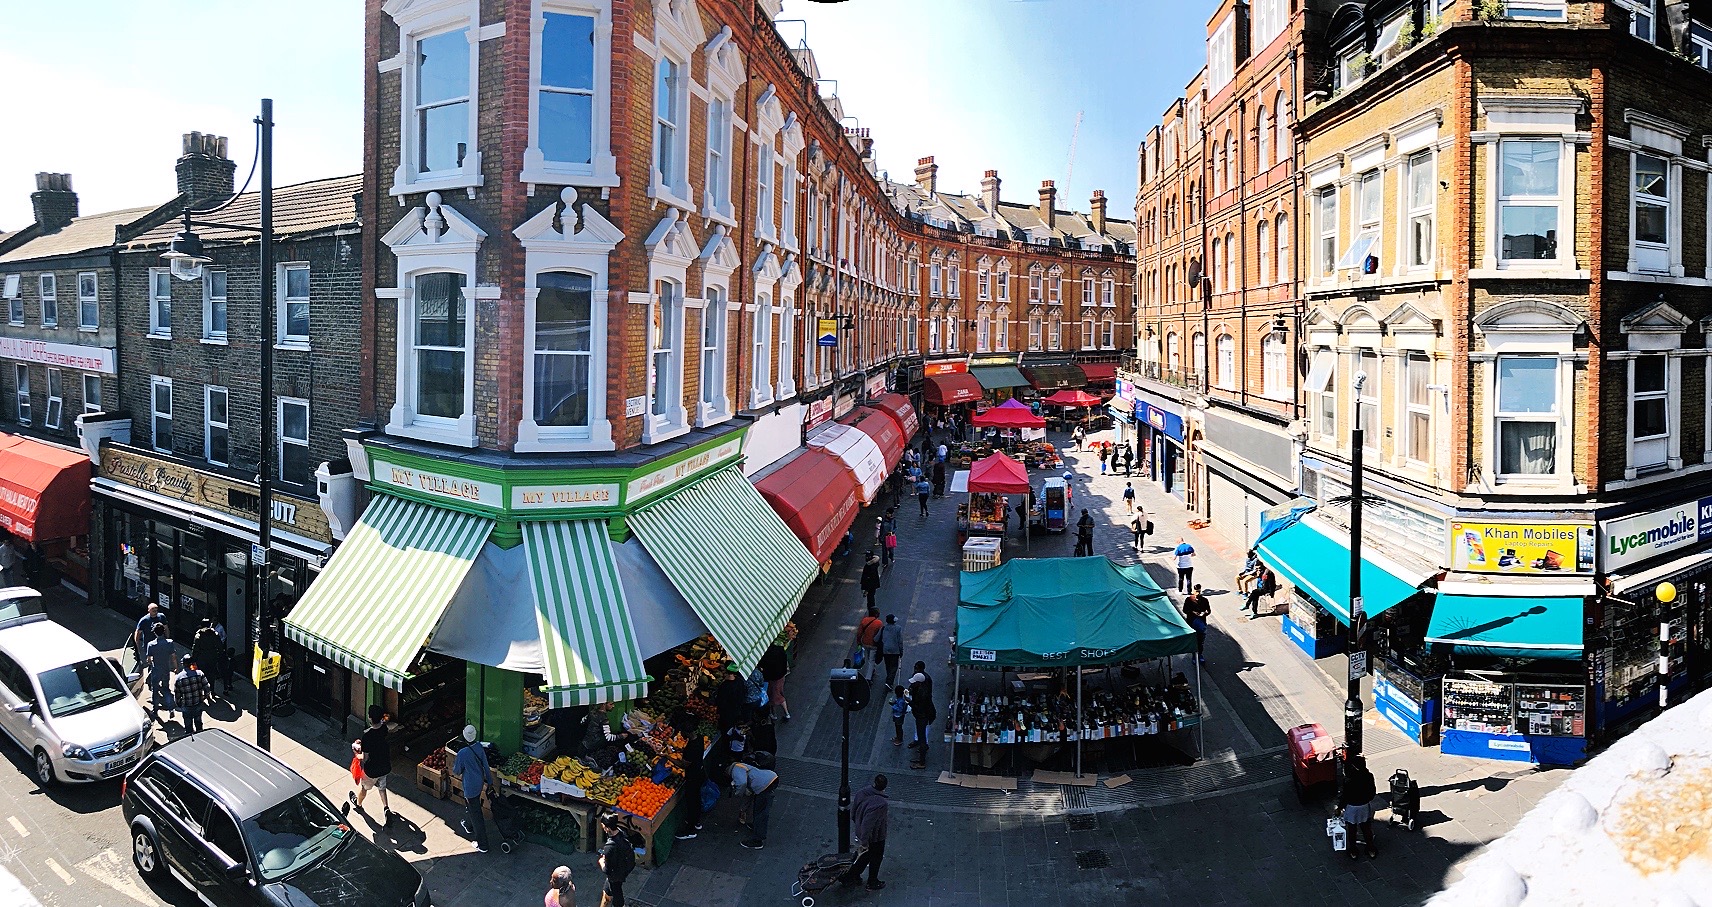 View of Electric Avenue in Brixton from the subway platform above